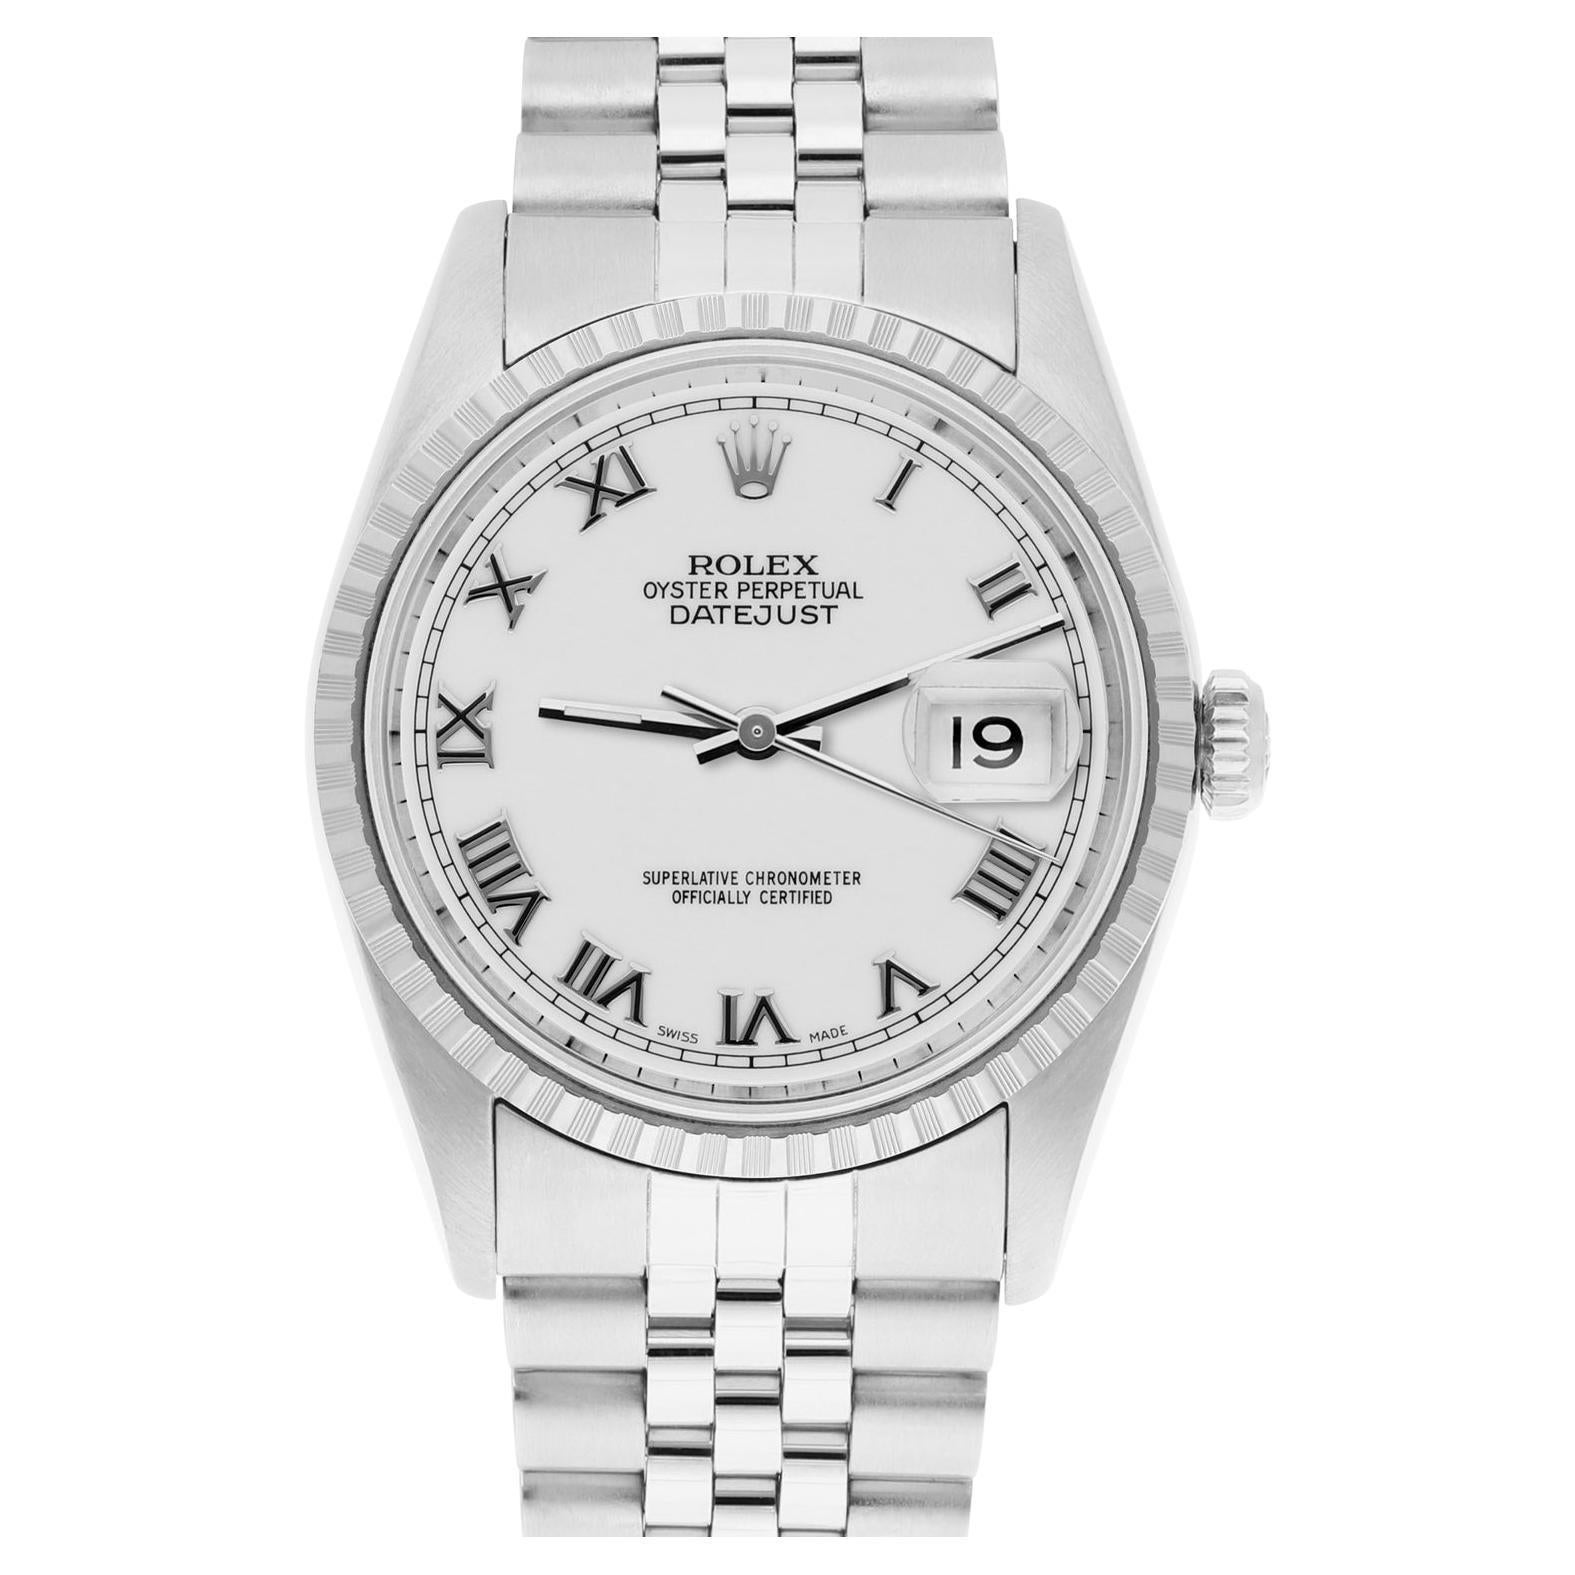 Rolex Datejust 36mm Stainless Steel Watch White Roman Dial 16220 Circa 2000 For Sale